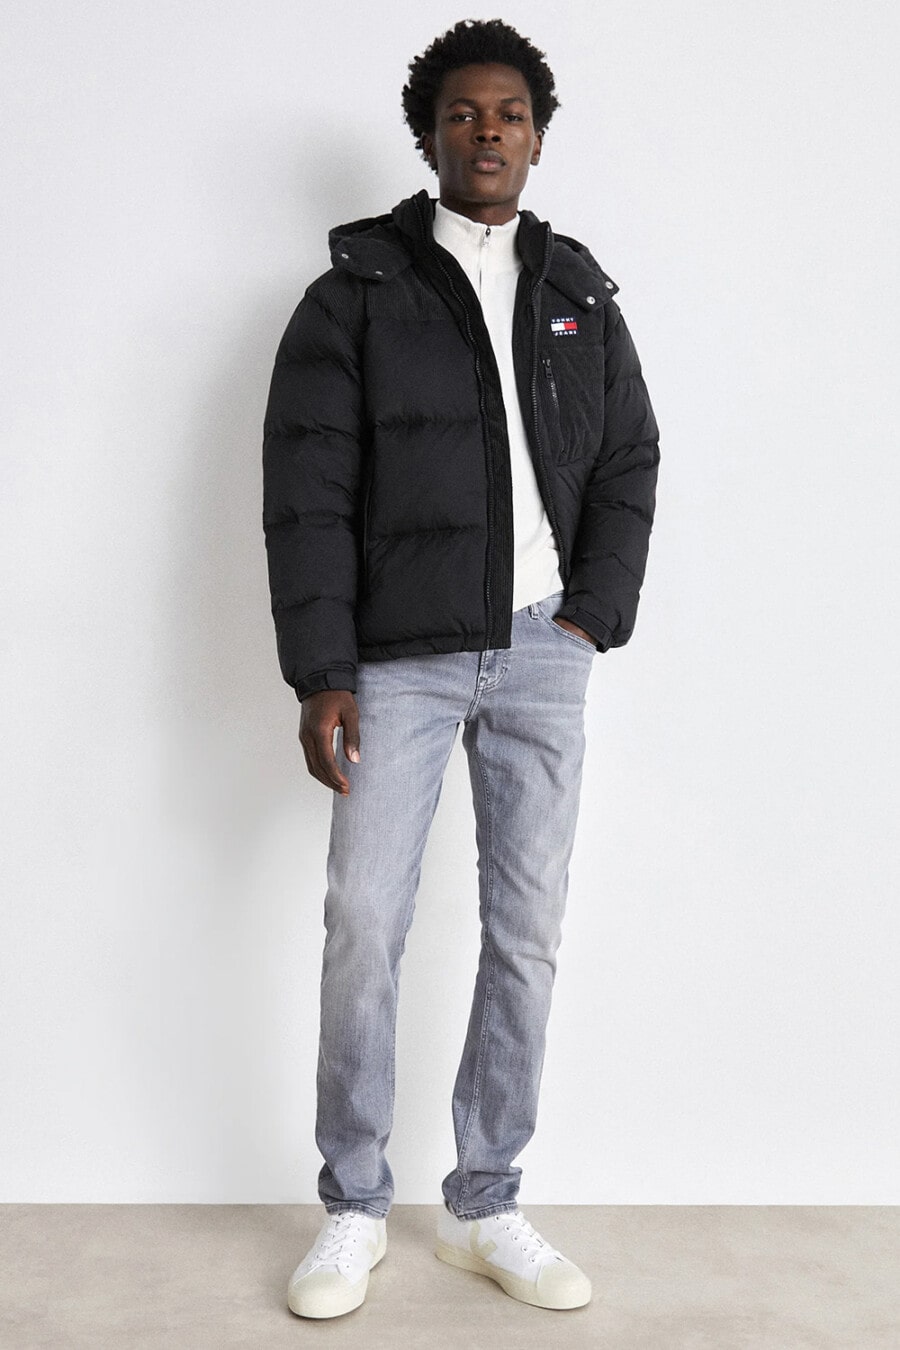 Men's light grey jeans, white zip-up cardigan, black puffer jacket and white sneakers outfit